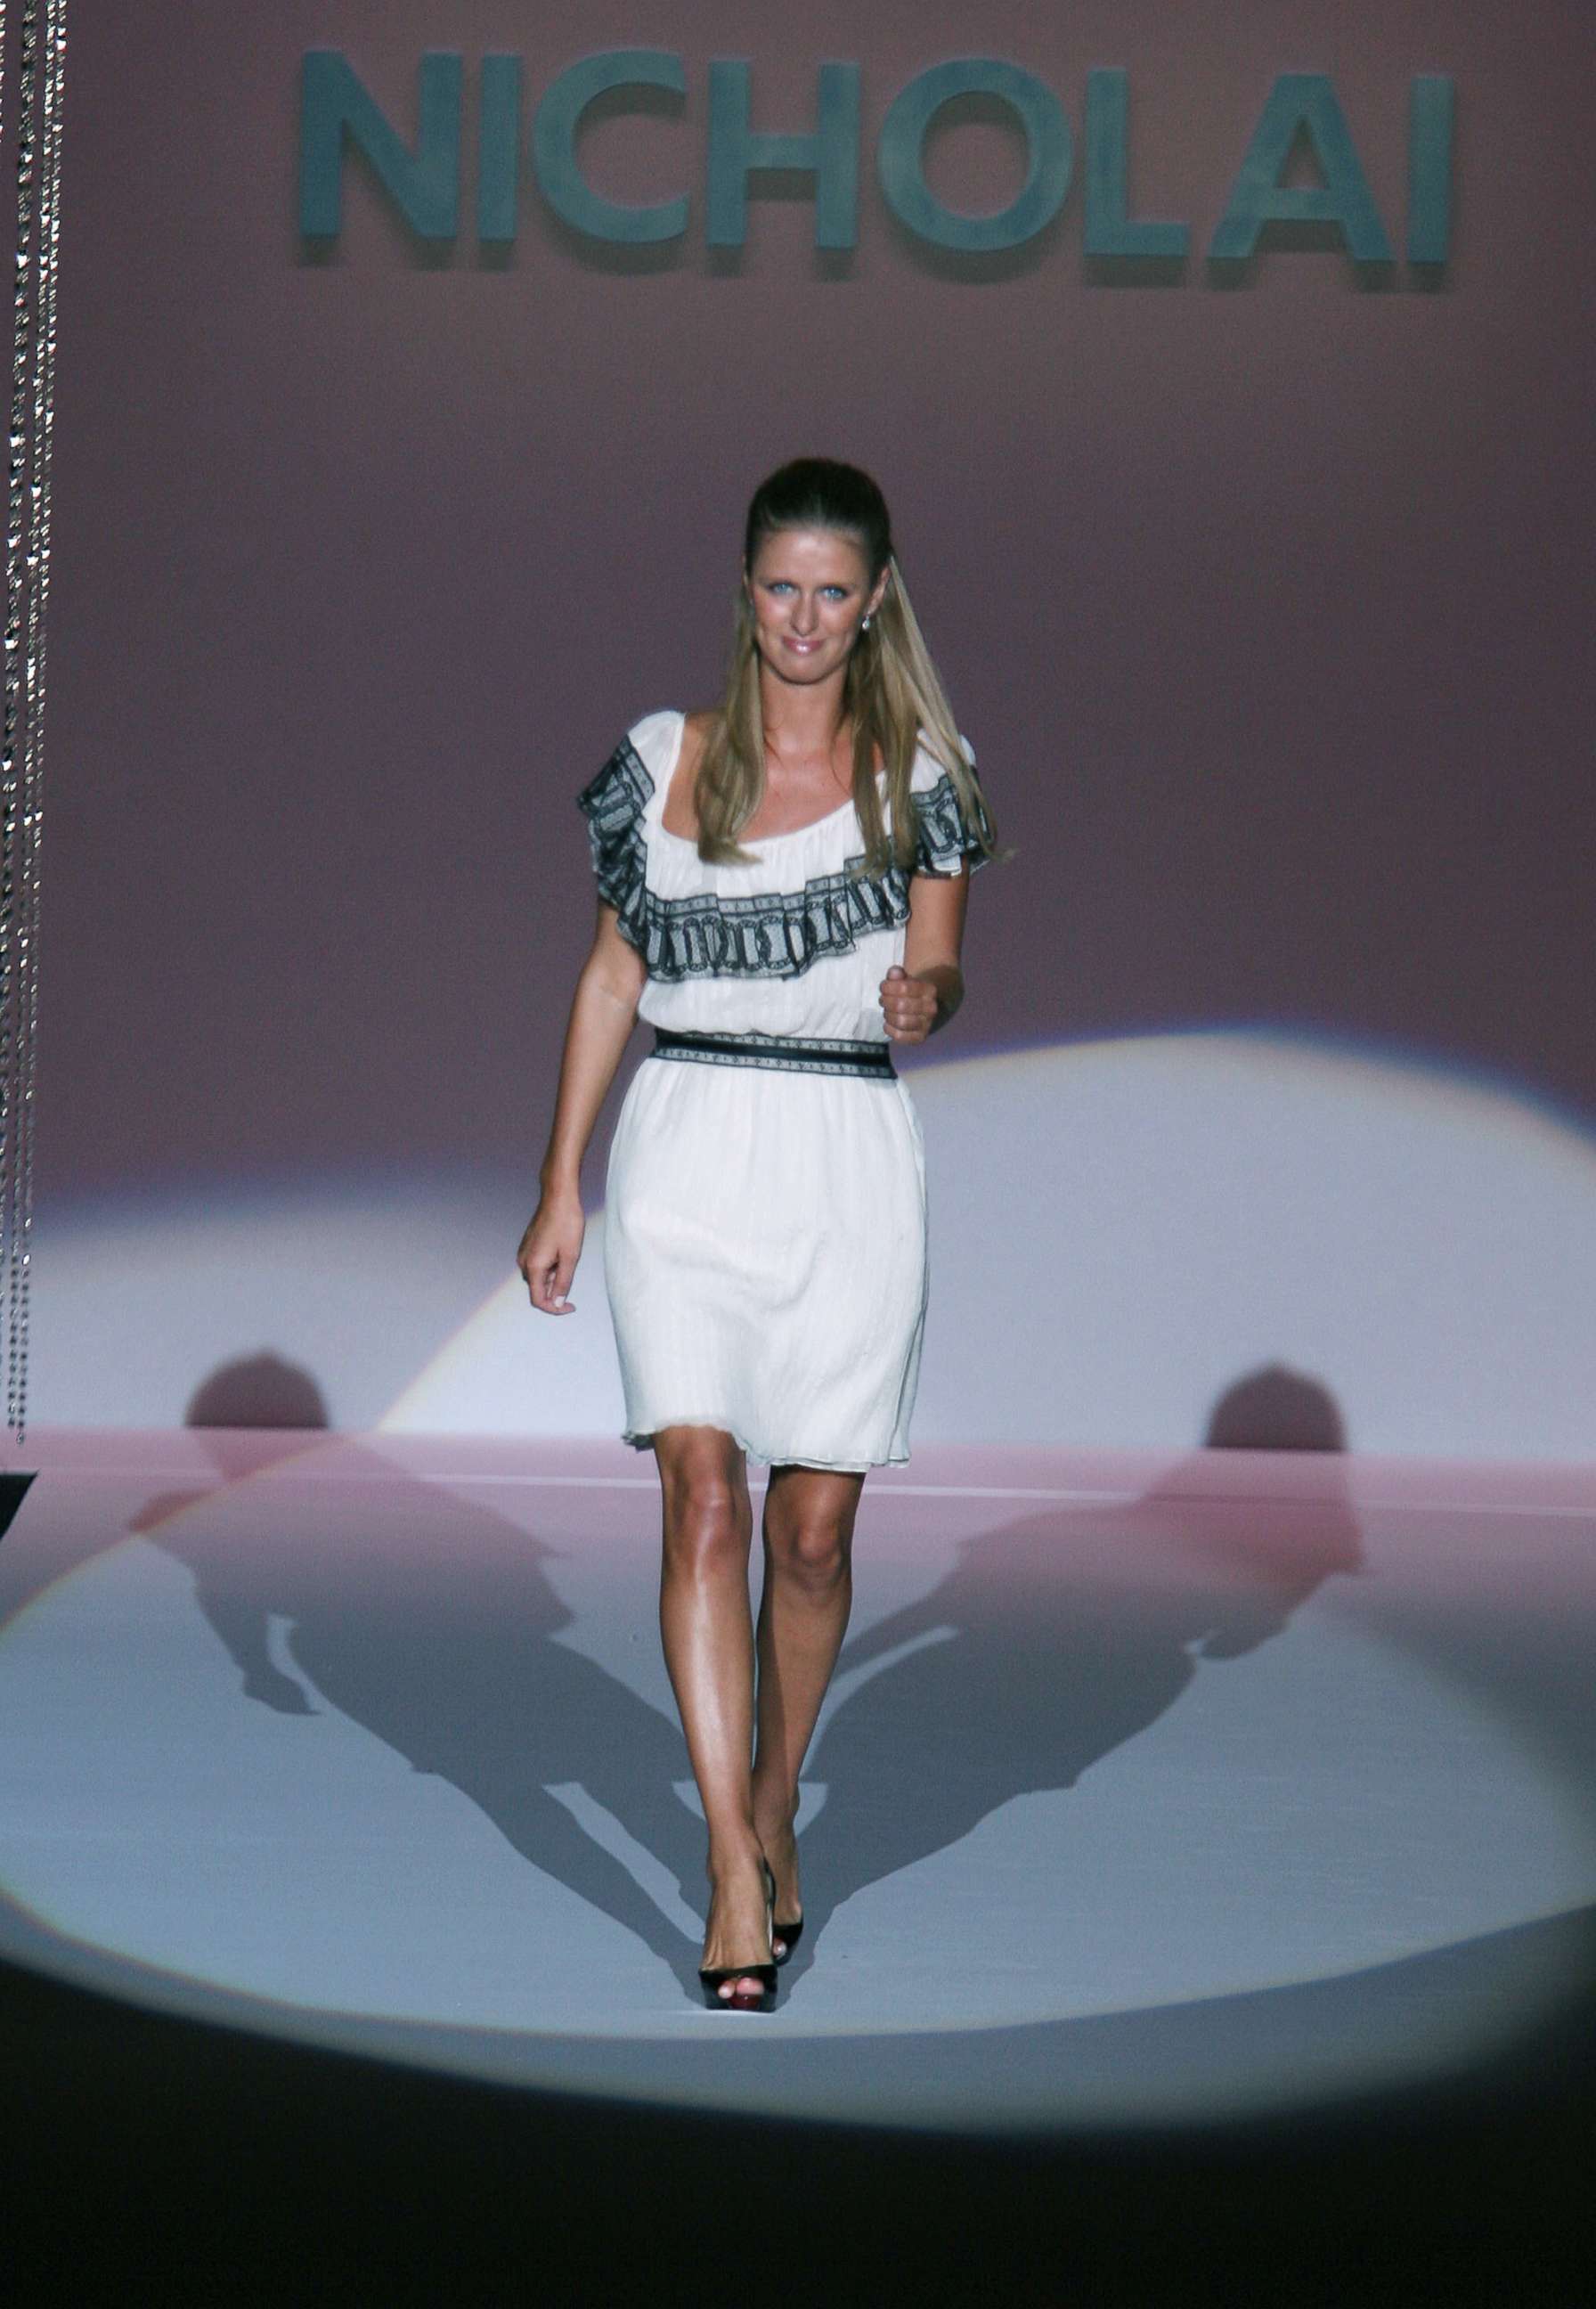 PHOTO: Nicky Hilton appears on the runway during the Nicholai 2008 Fashion Show at The Tent in Bryant Park during the Mercedes-Benz Fashion Week Spring 2008, Sept. 9, 2007, in New York.